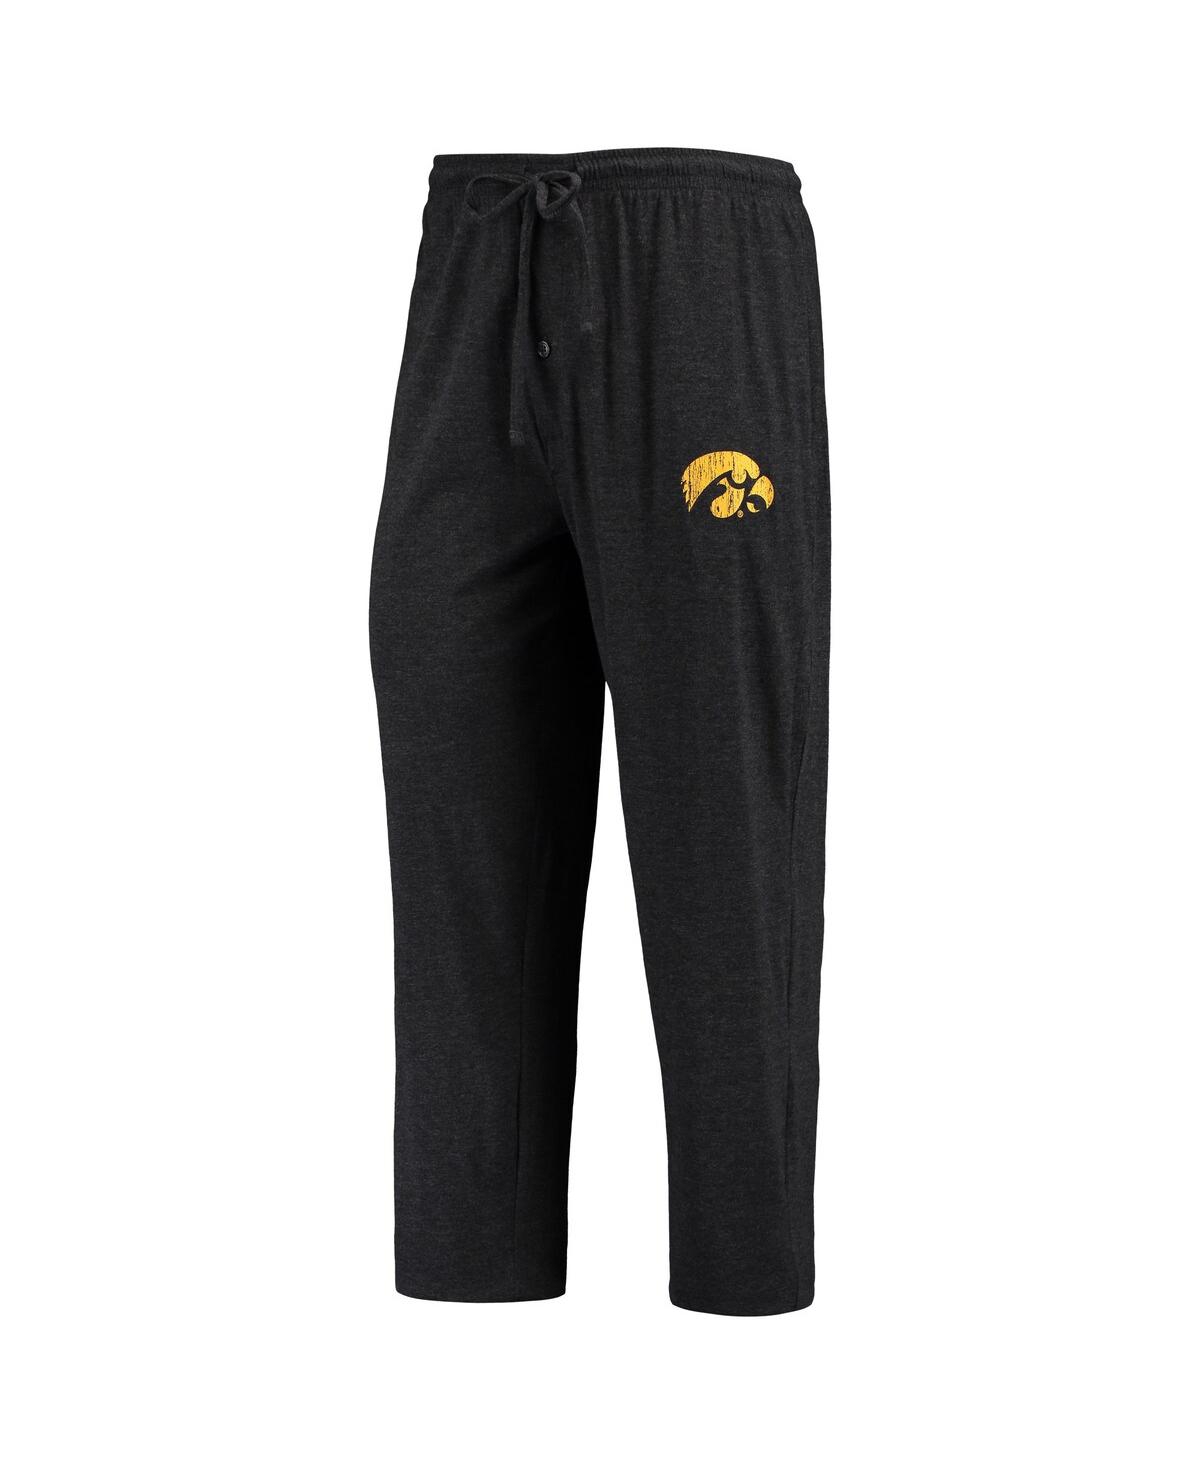 Shop Concepts Sport Men's  Black And Heathered Charcoal Iowa Hawkeyes Meter Long Sleeve T-shirt And Pants  In Black,heathered Charcoal